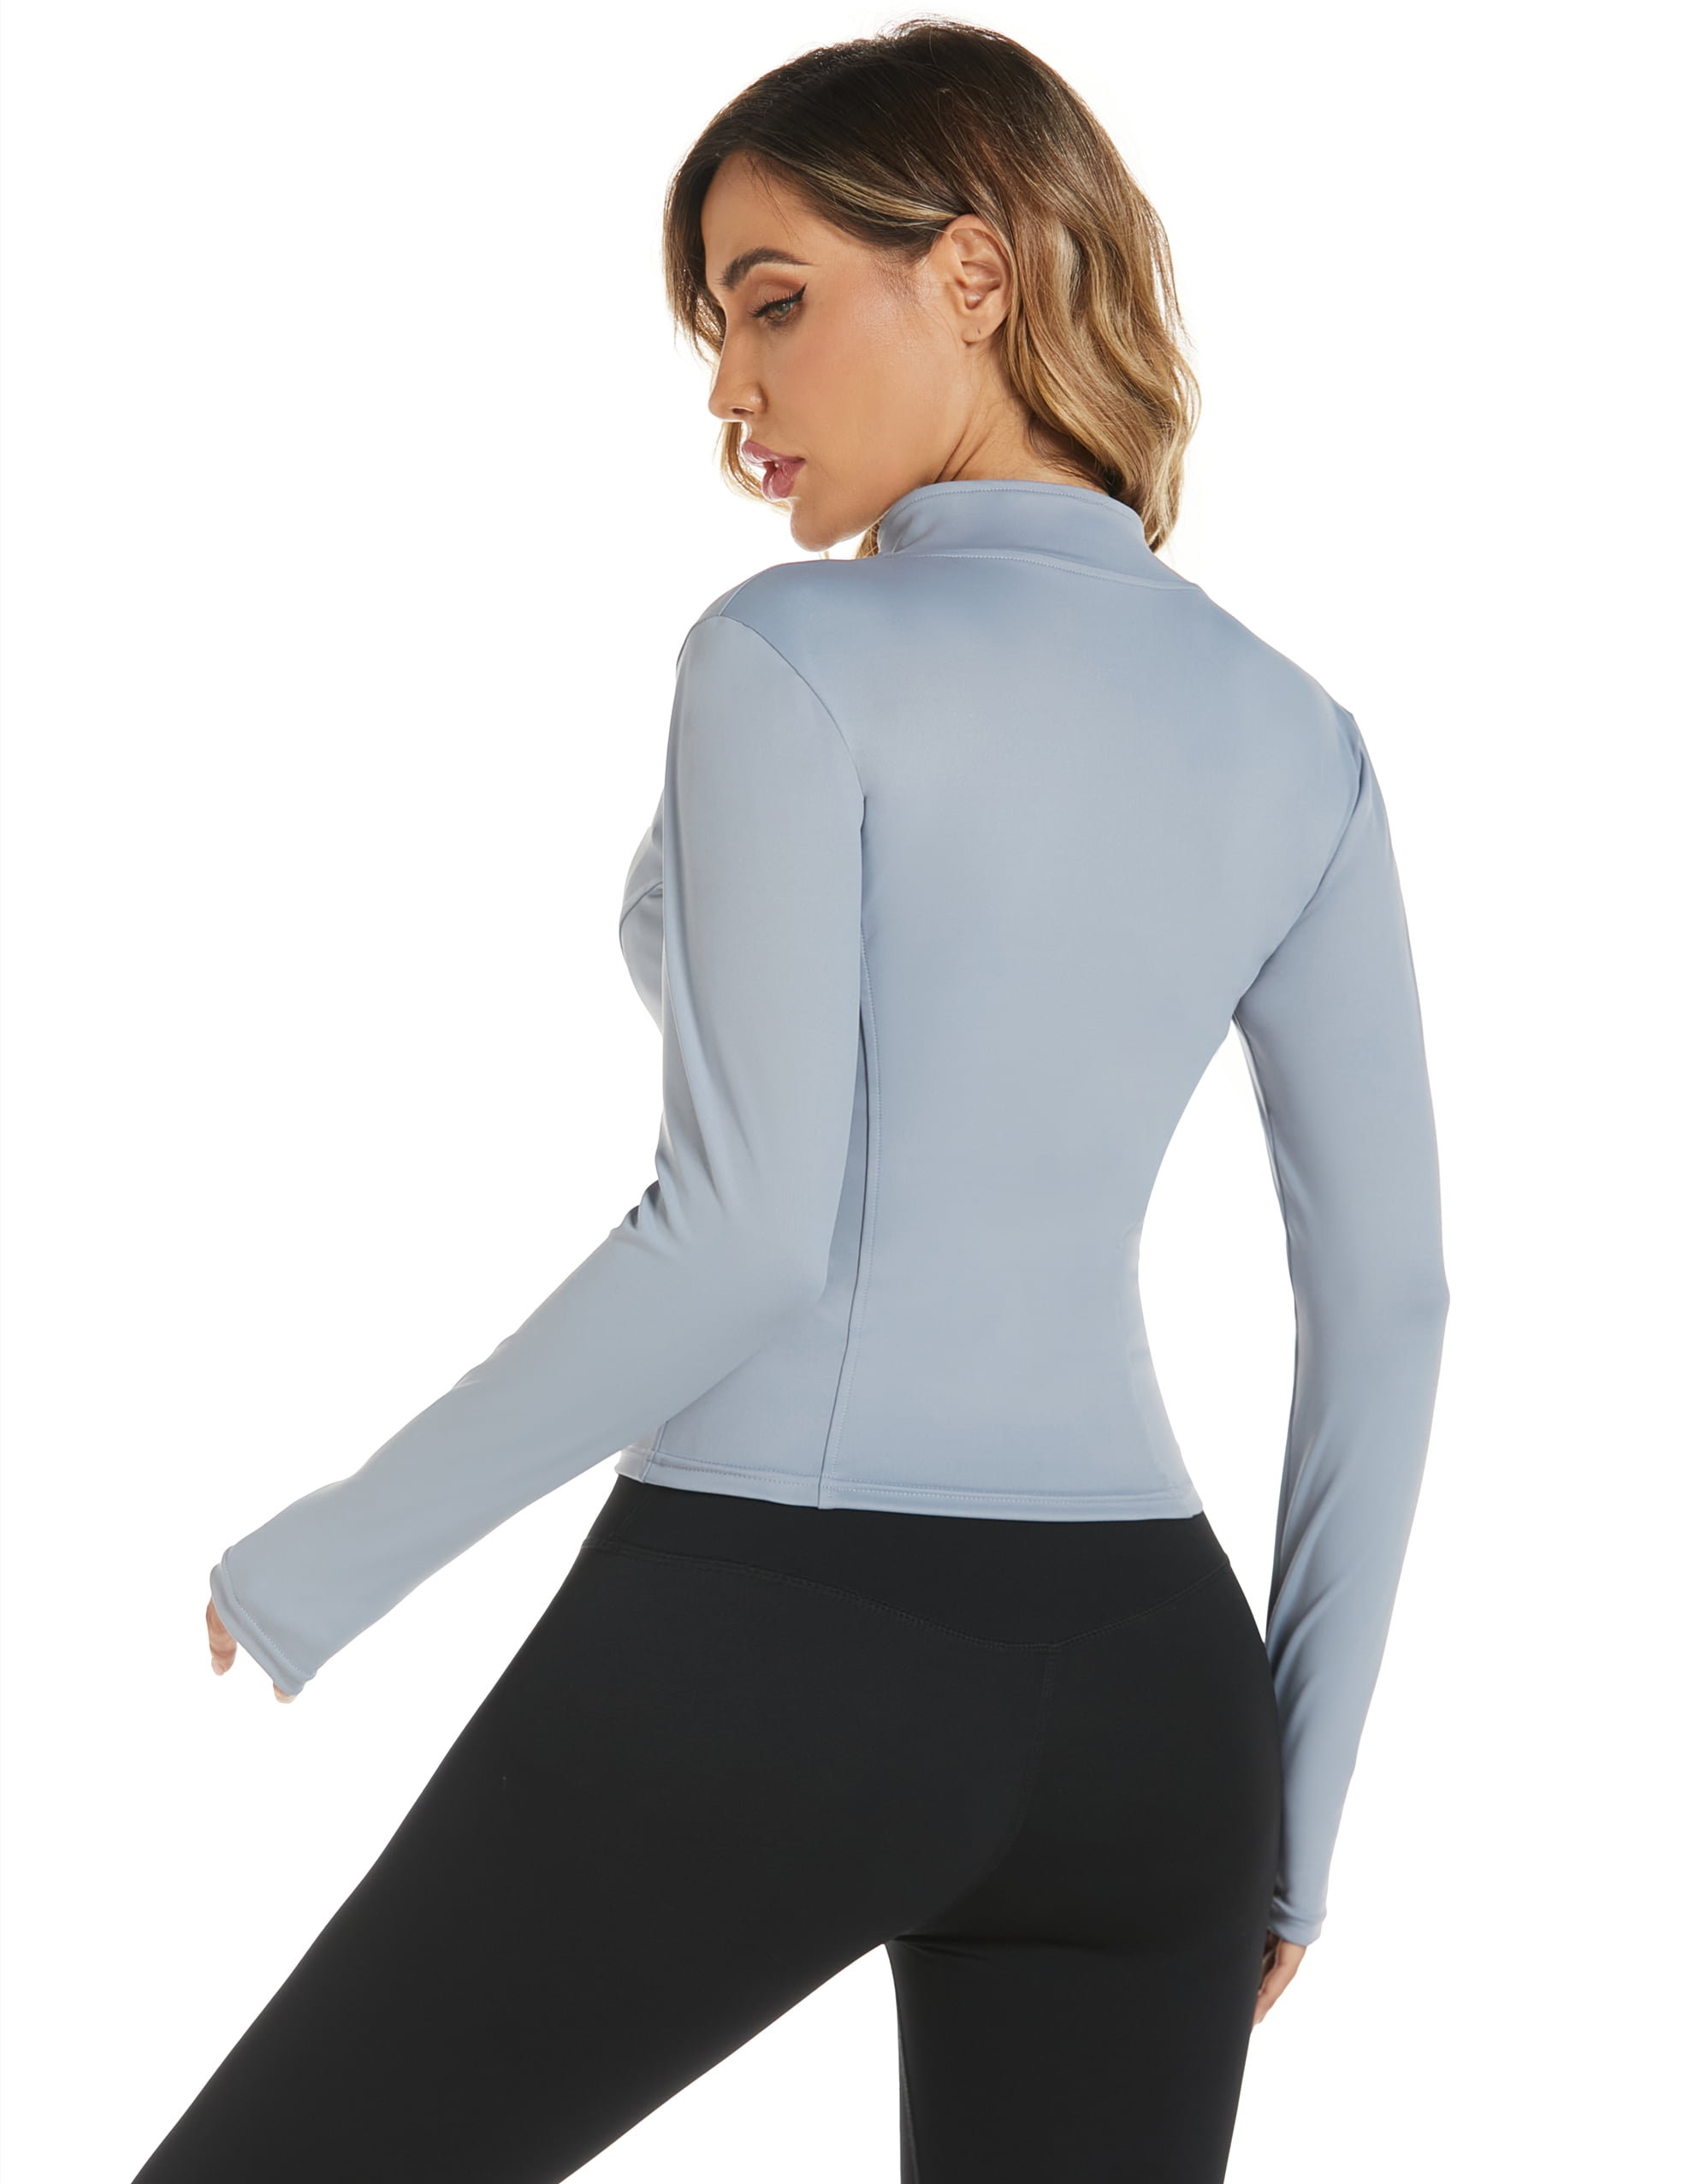 HOTLOOX Women's Slim Fit Yoga Workout Jacket Full Zip Thumb Hole Pockets  Track Outerwear S-XXL